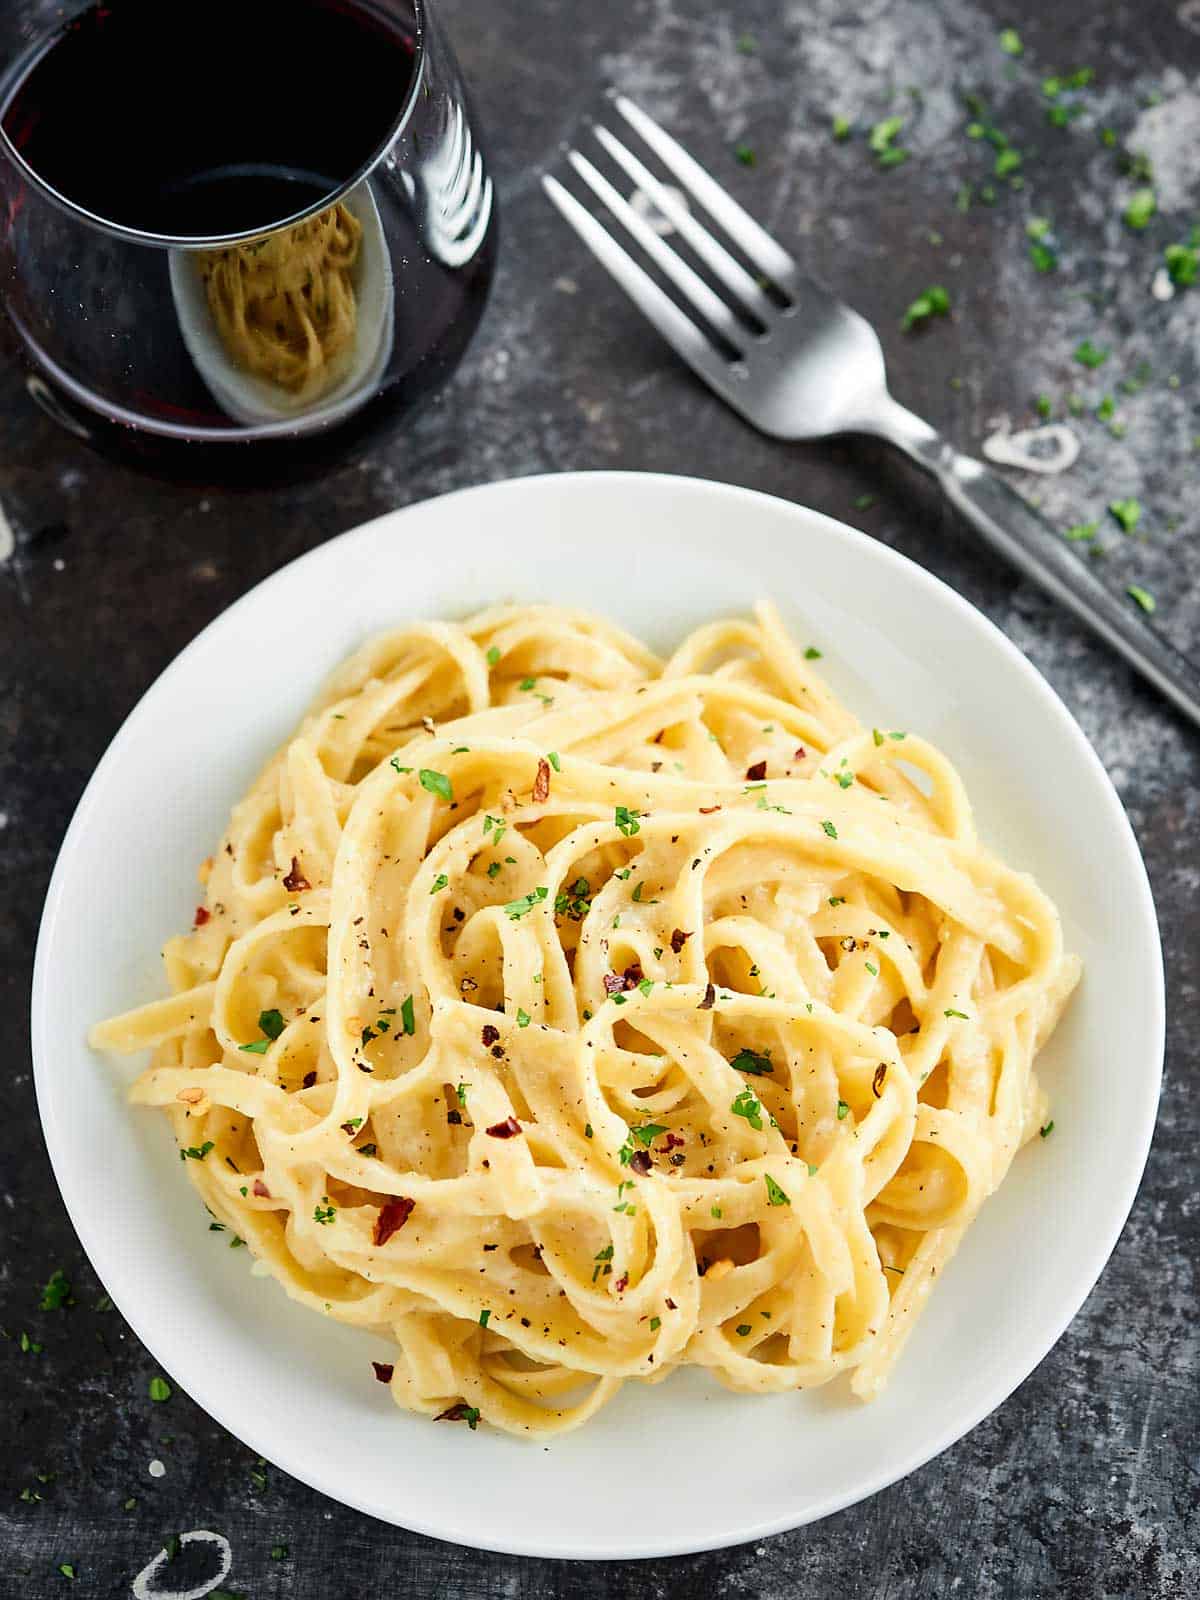 Healthy Alfredo Sauce Recipe - only 130 calories per serving!